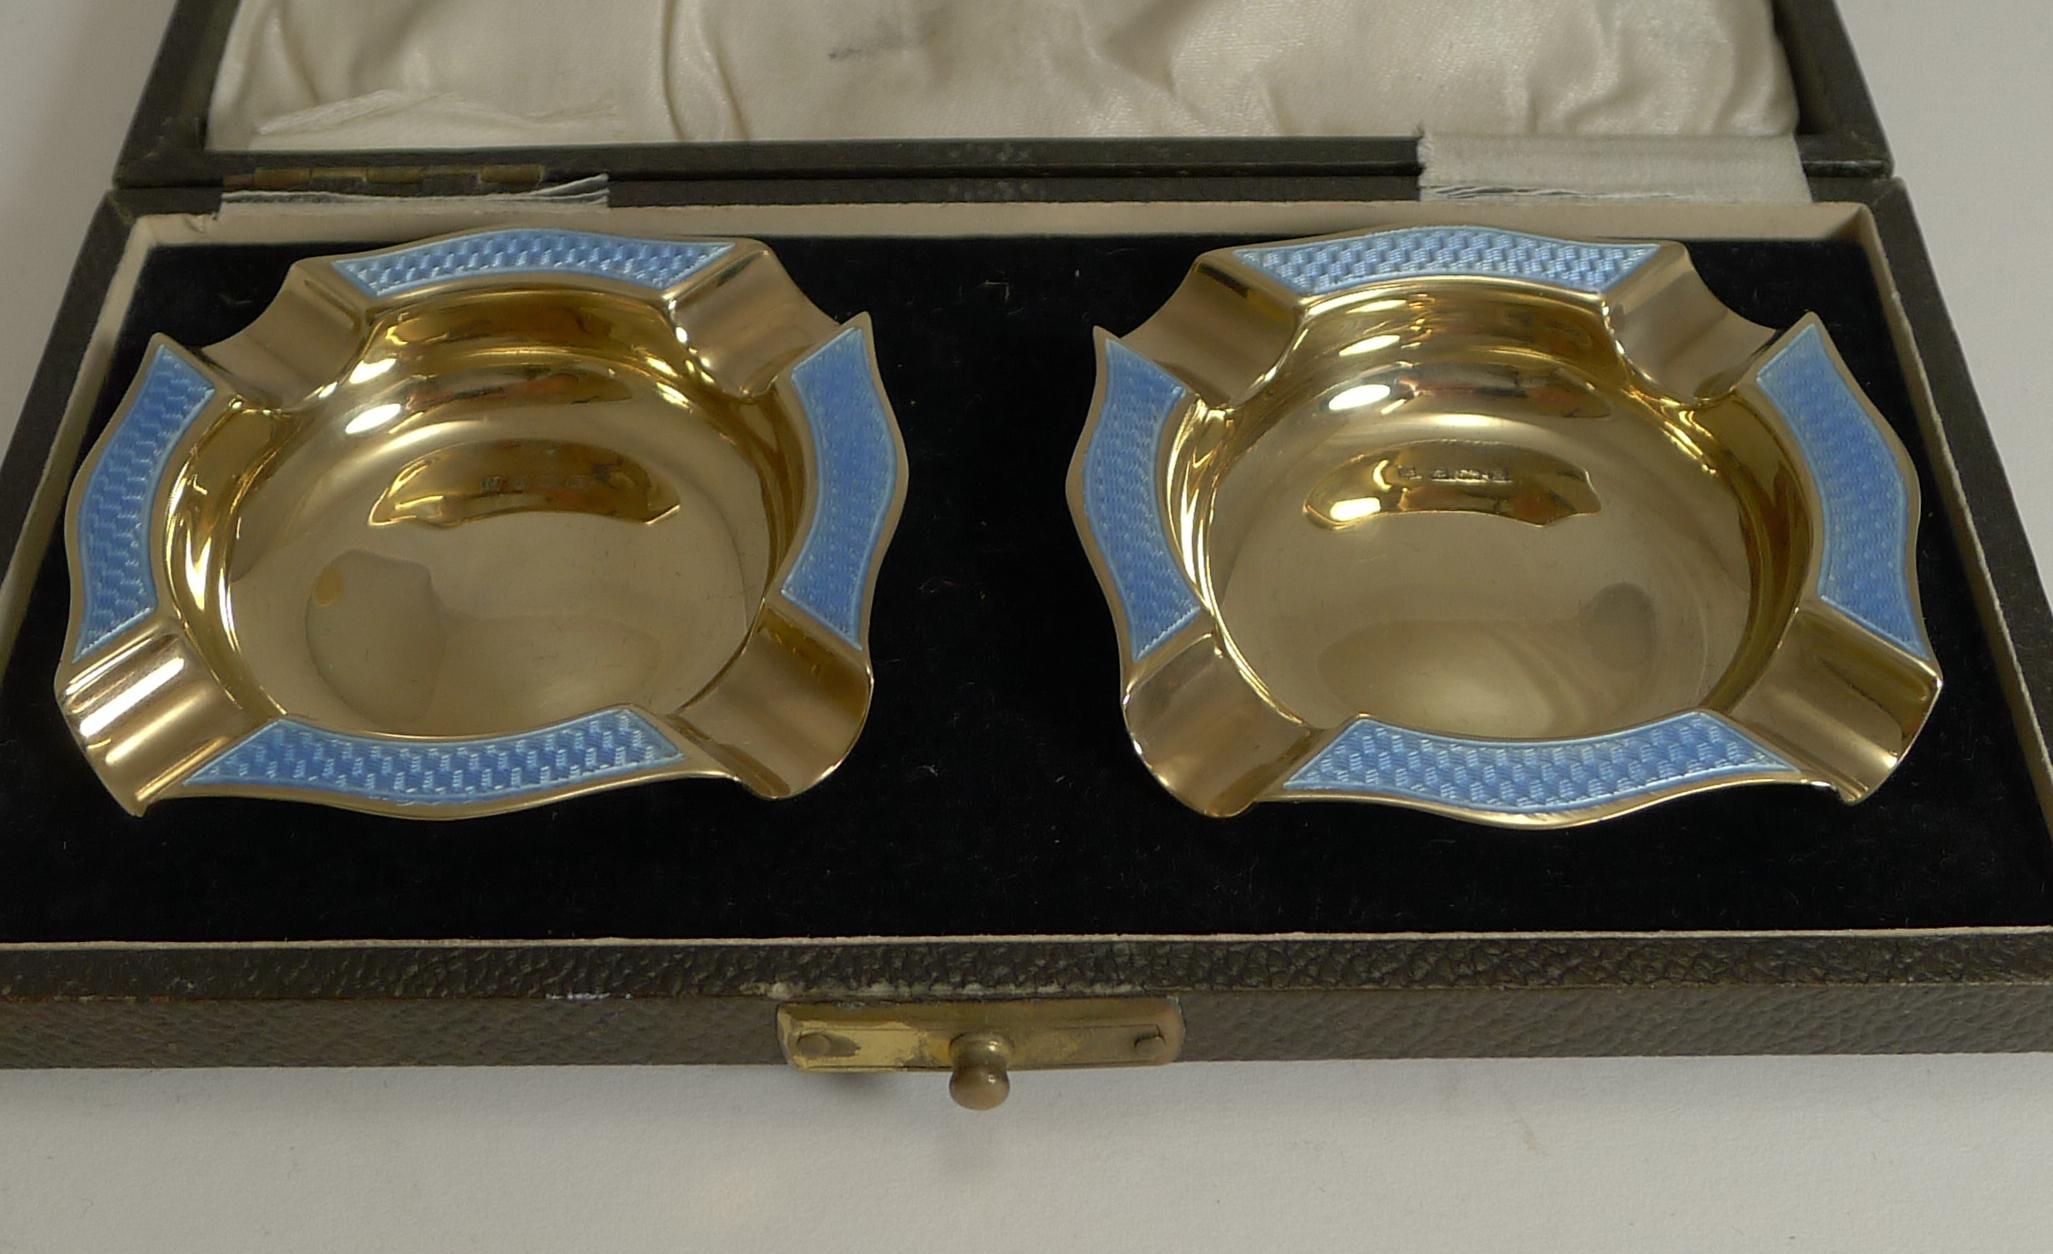 A magnificent and very glamorous pair of English sterling silver, gilt (gold on sterling silver) ashtrays decorated with a stunning blue guilloche enamel without damage.

Each is fully hallmarked for Birmingham 1929 together with the makers mark